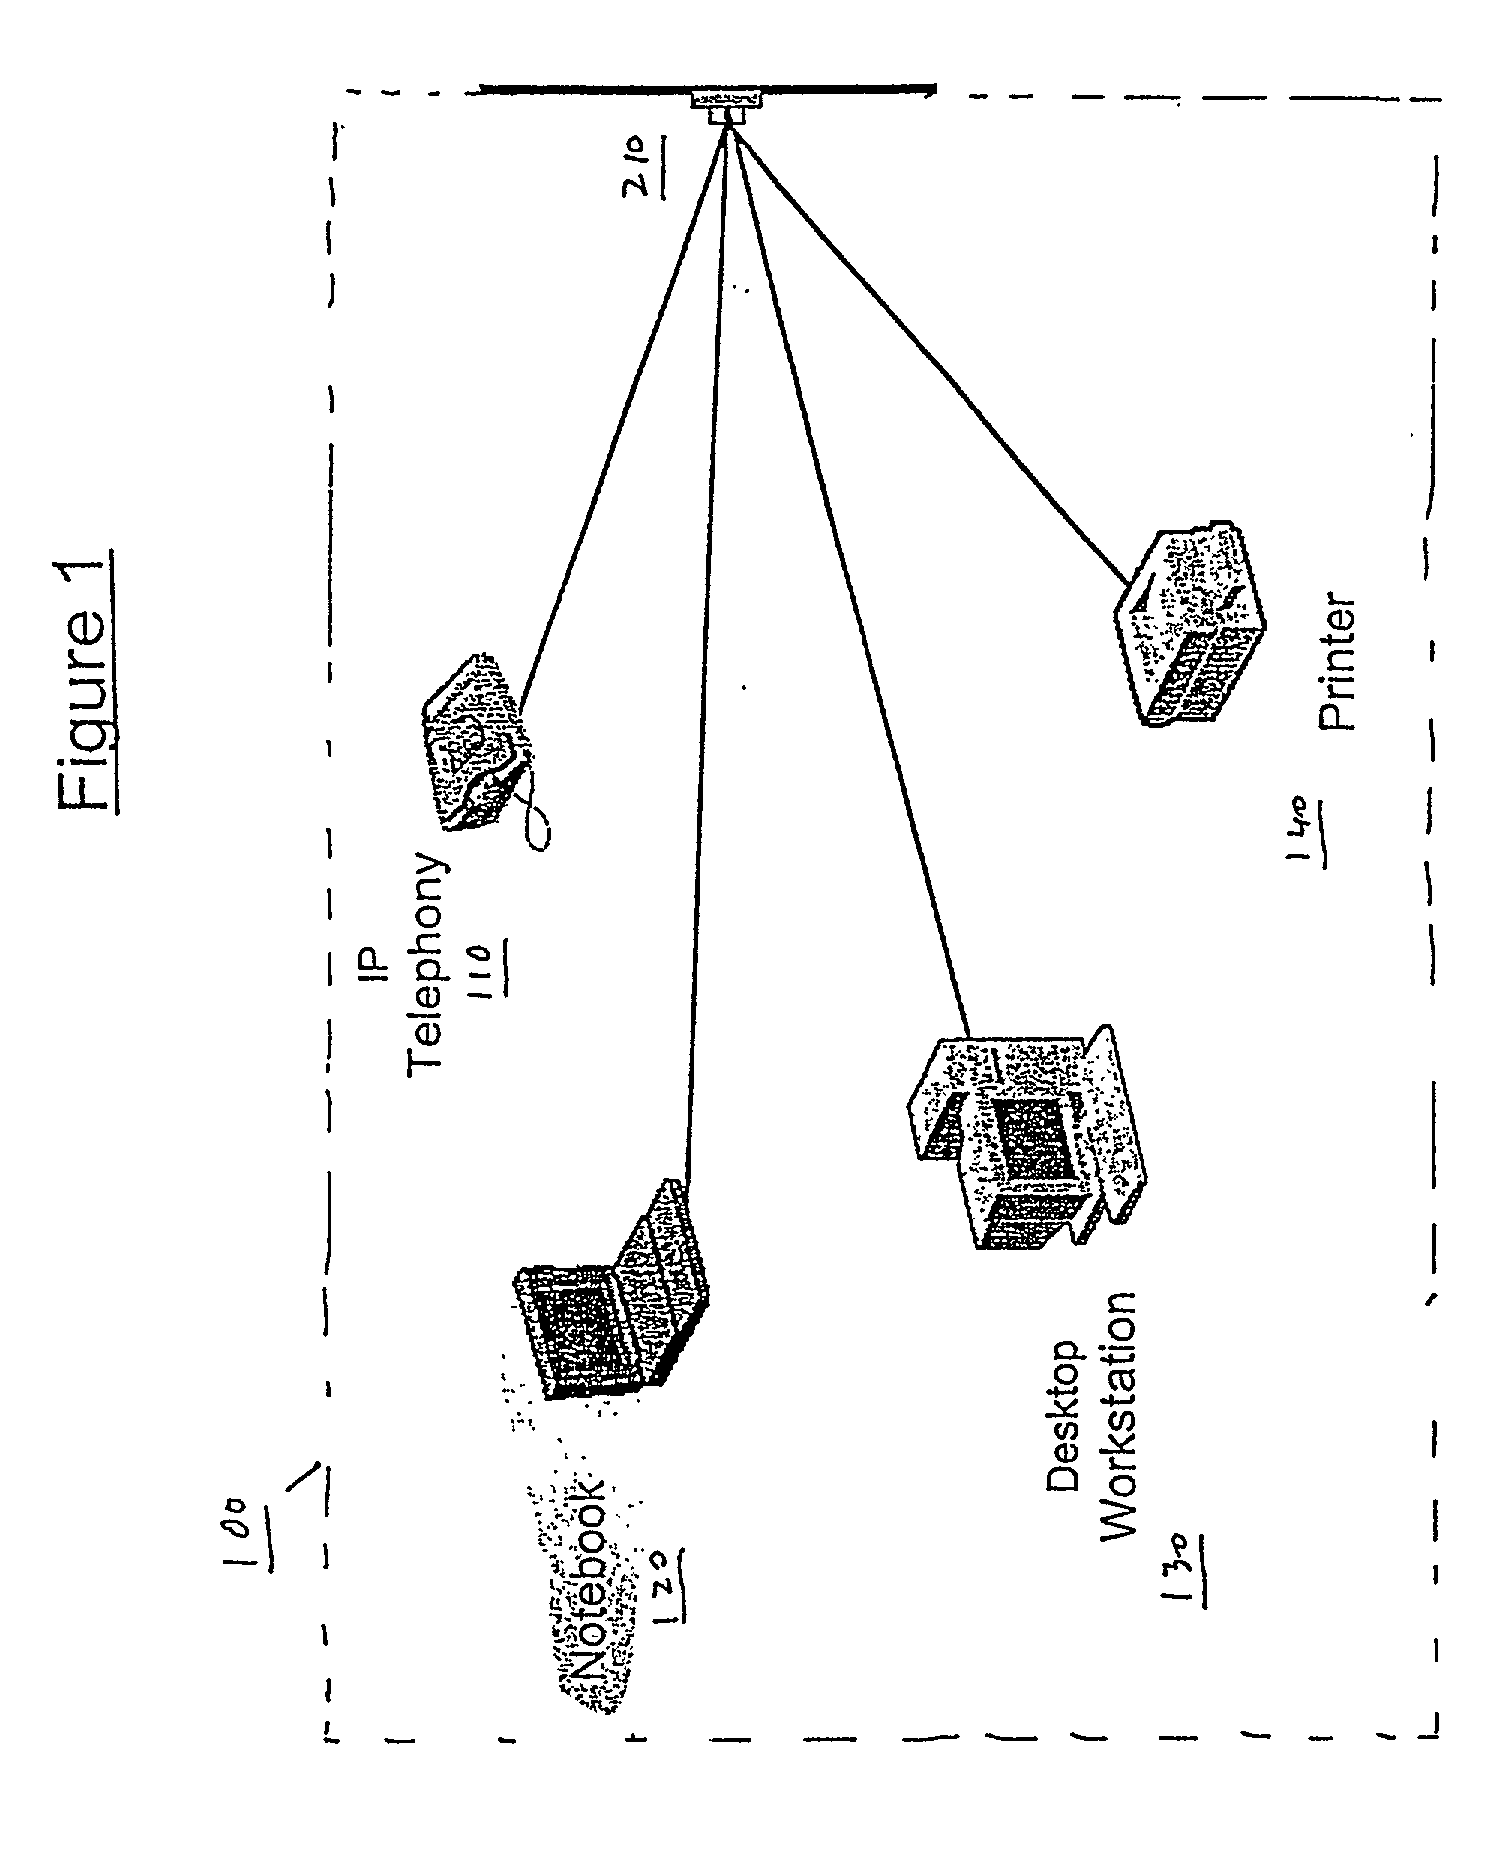 Method for selectively providing access to voice and data networks by use of intelligent hardware